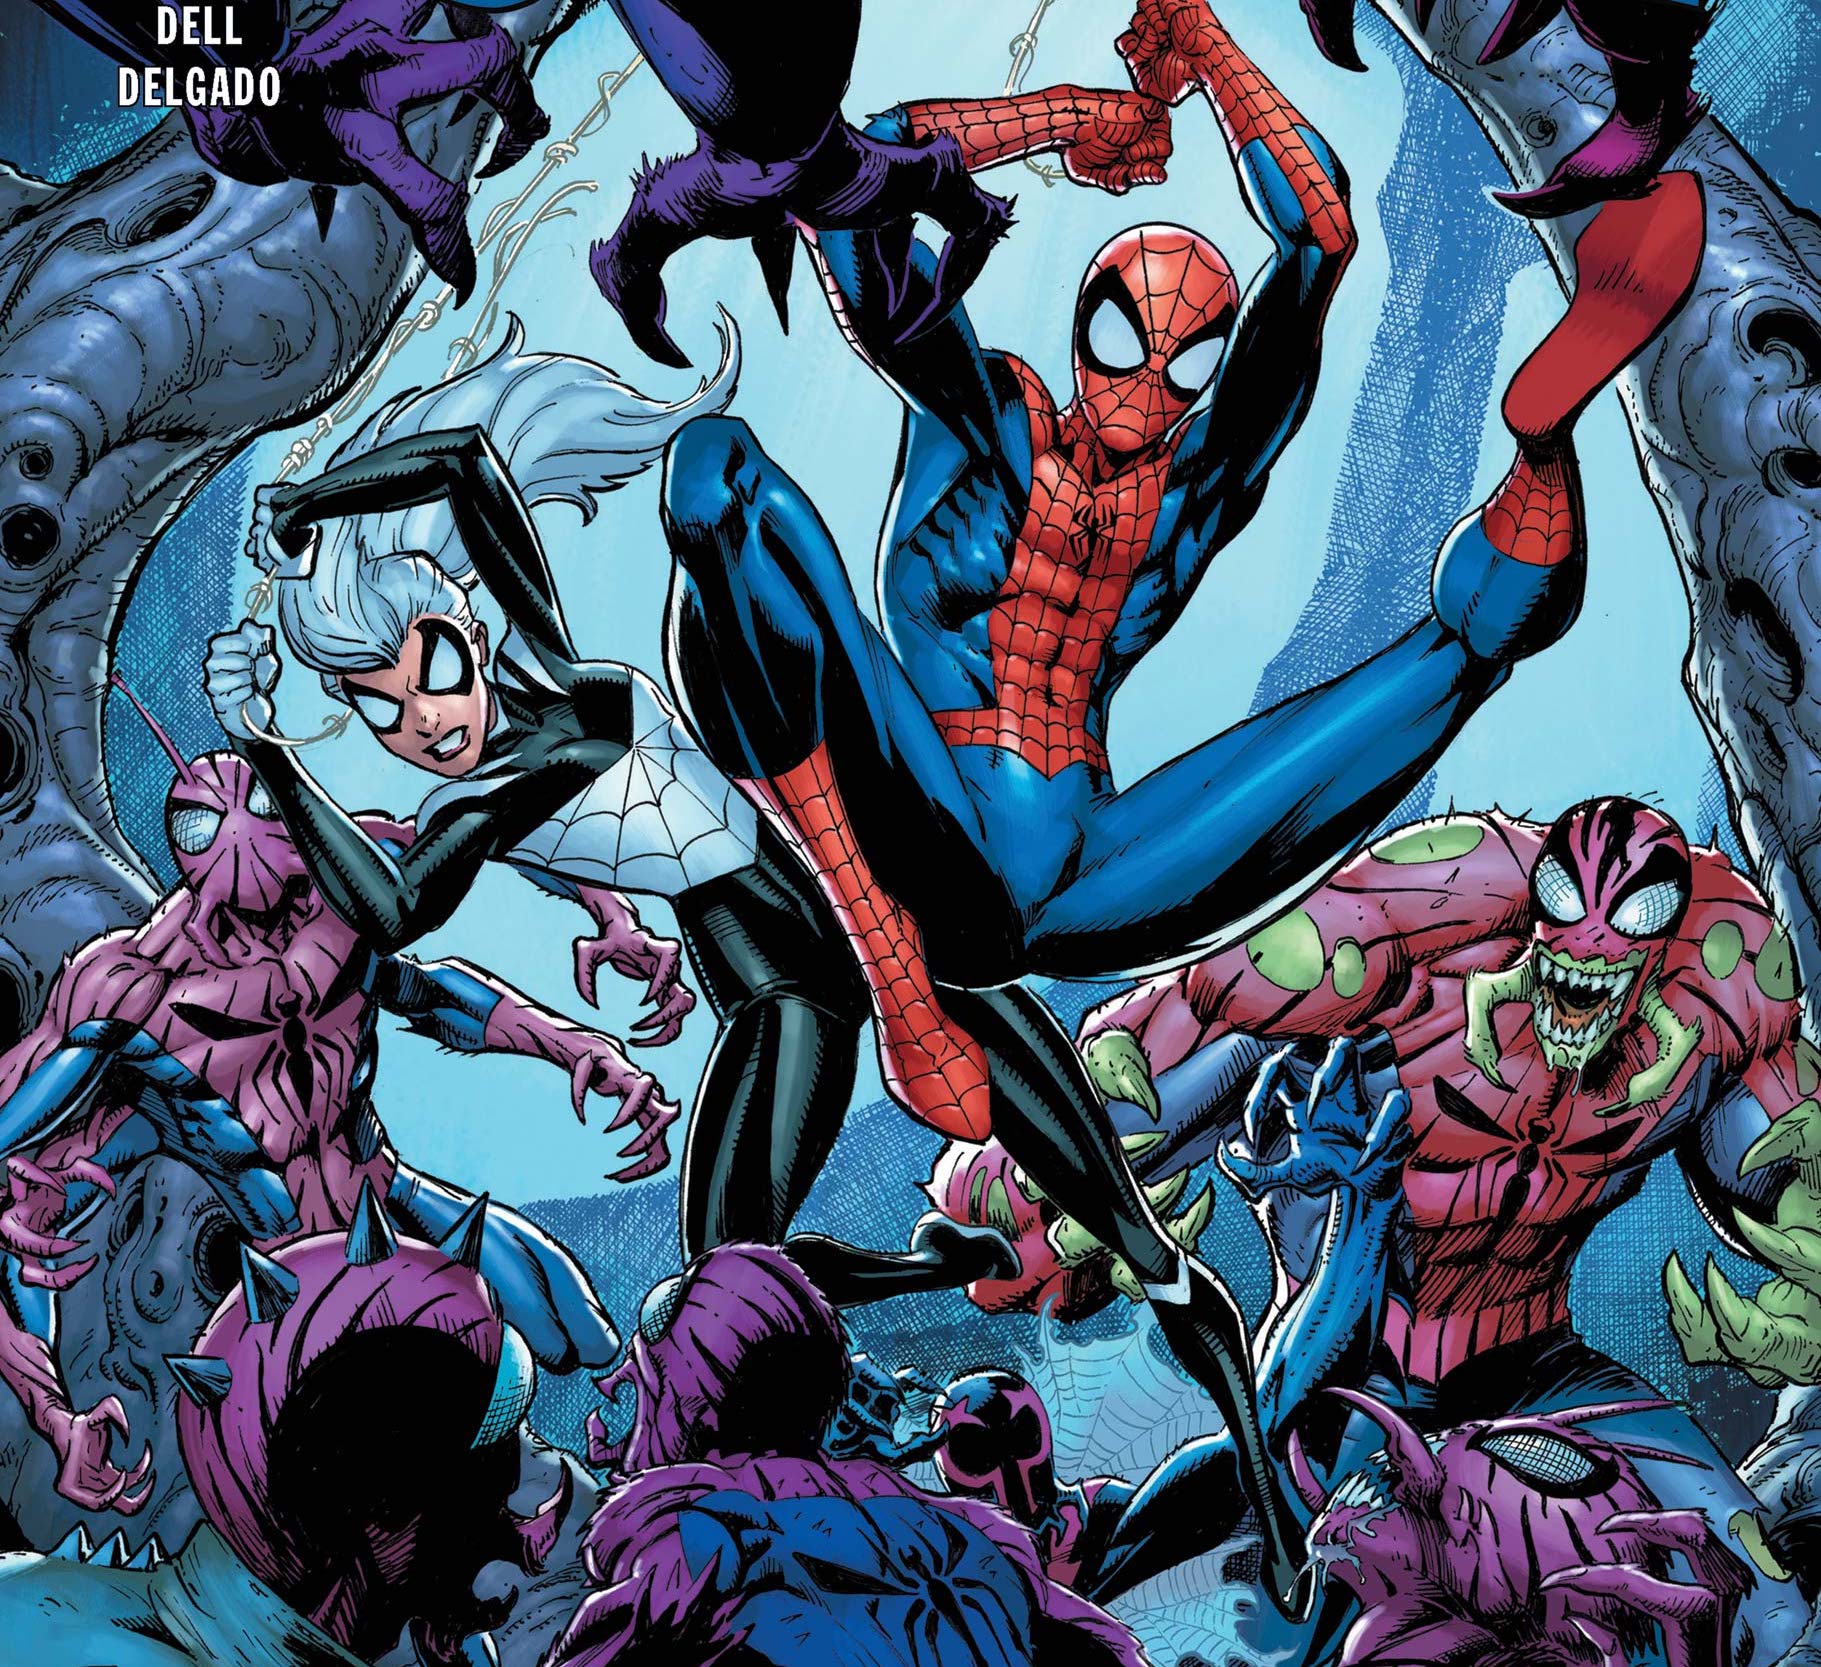 'Spider-Man' #3 features temples of doom and tons of characters on the page